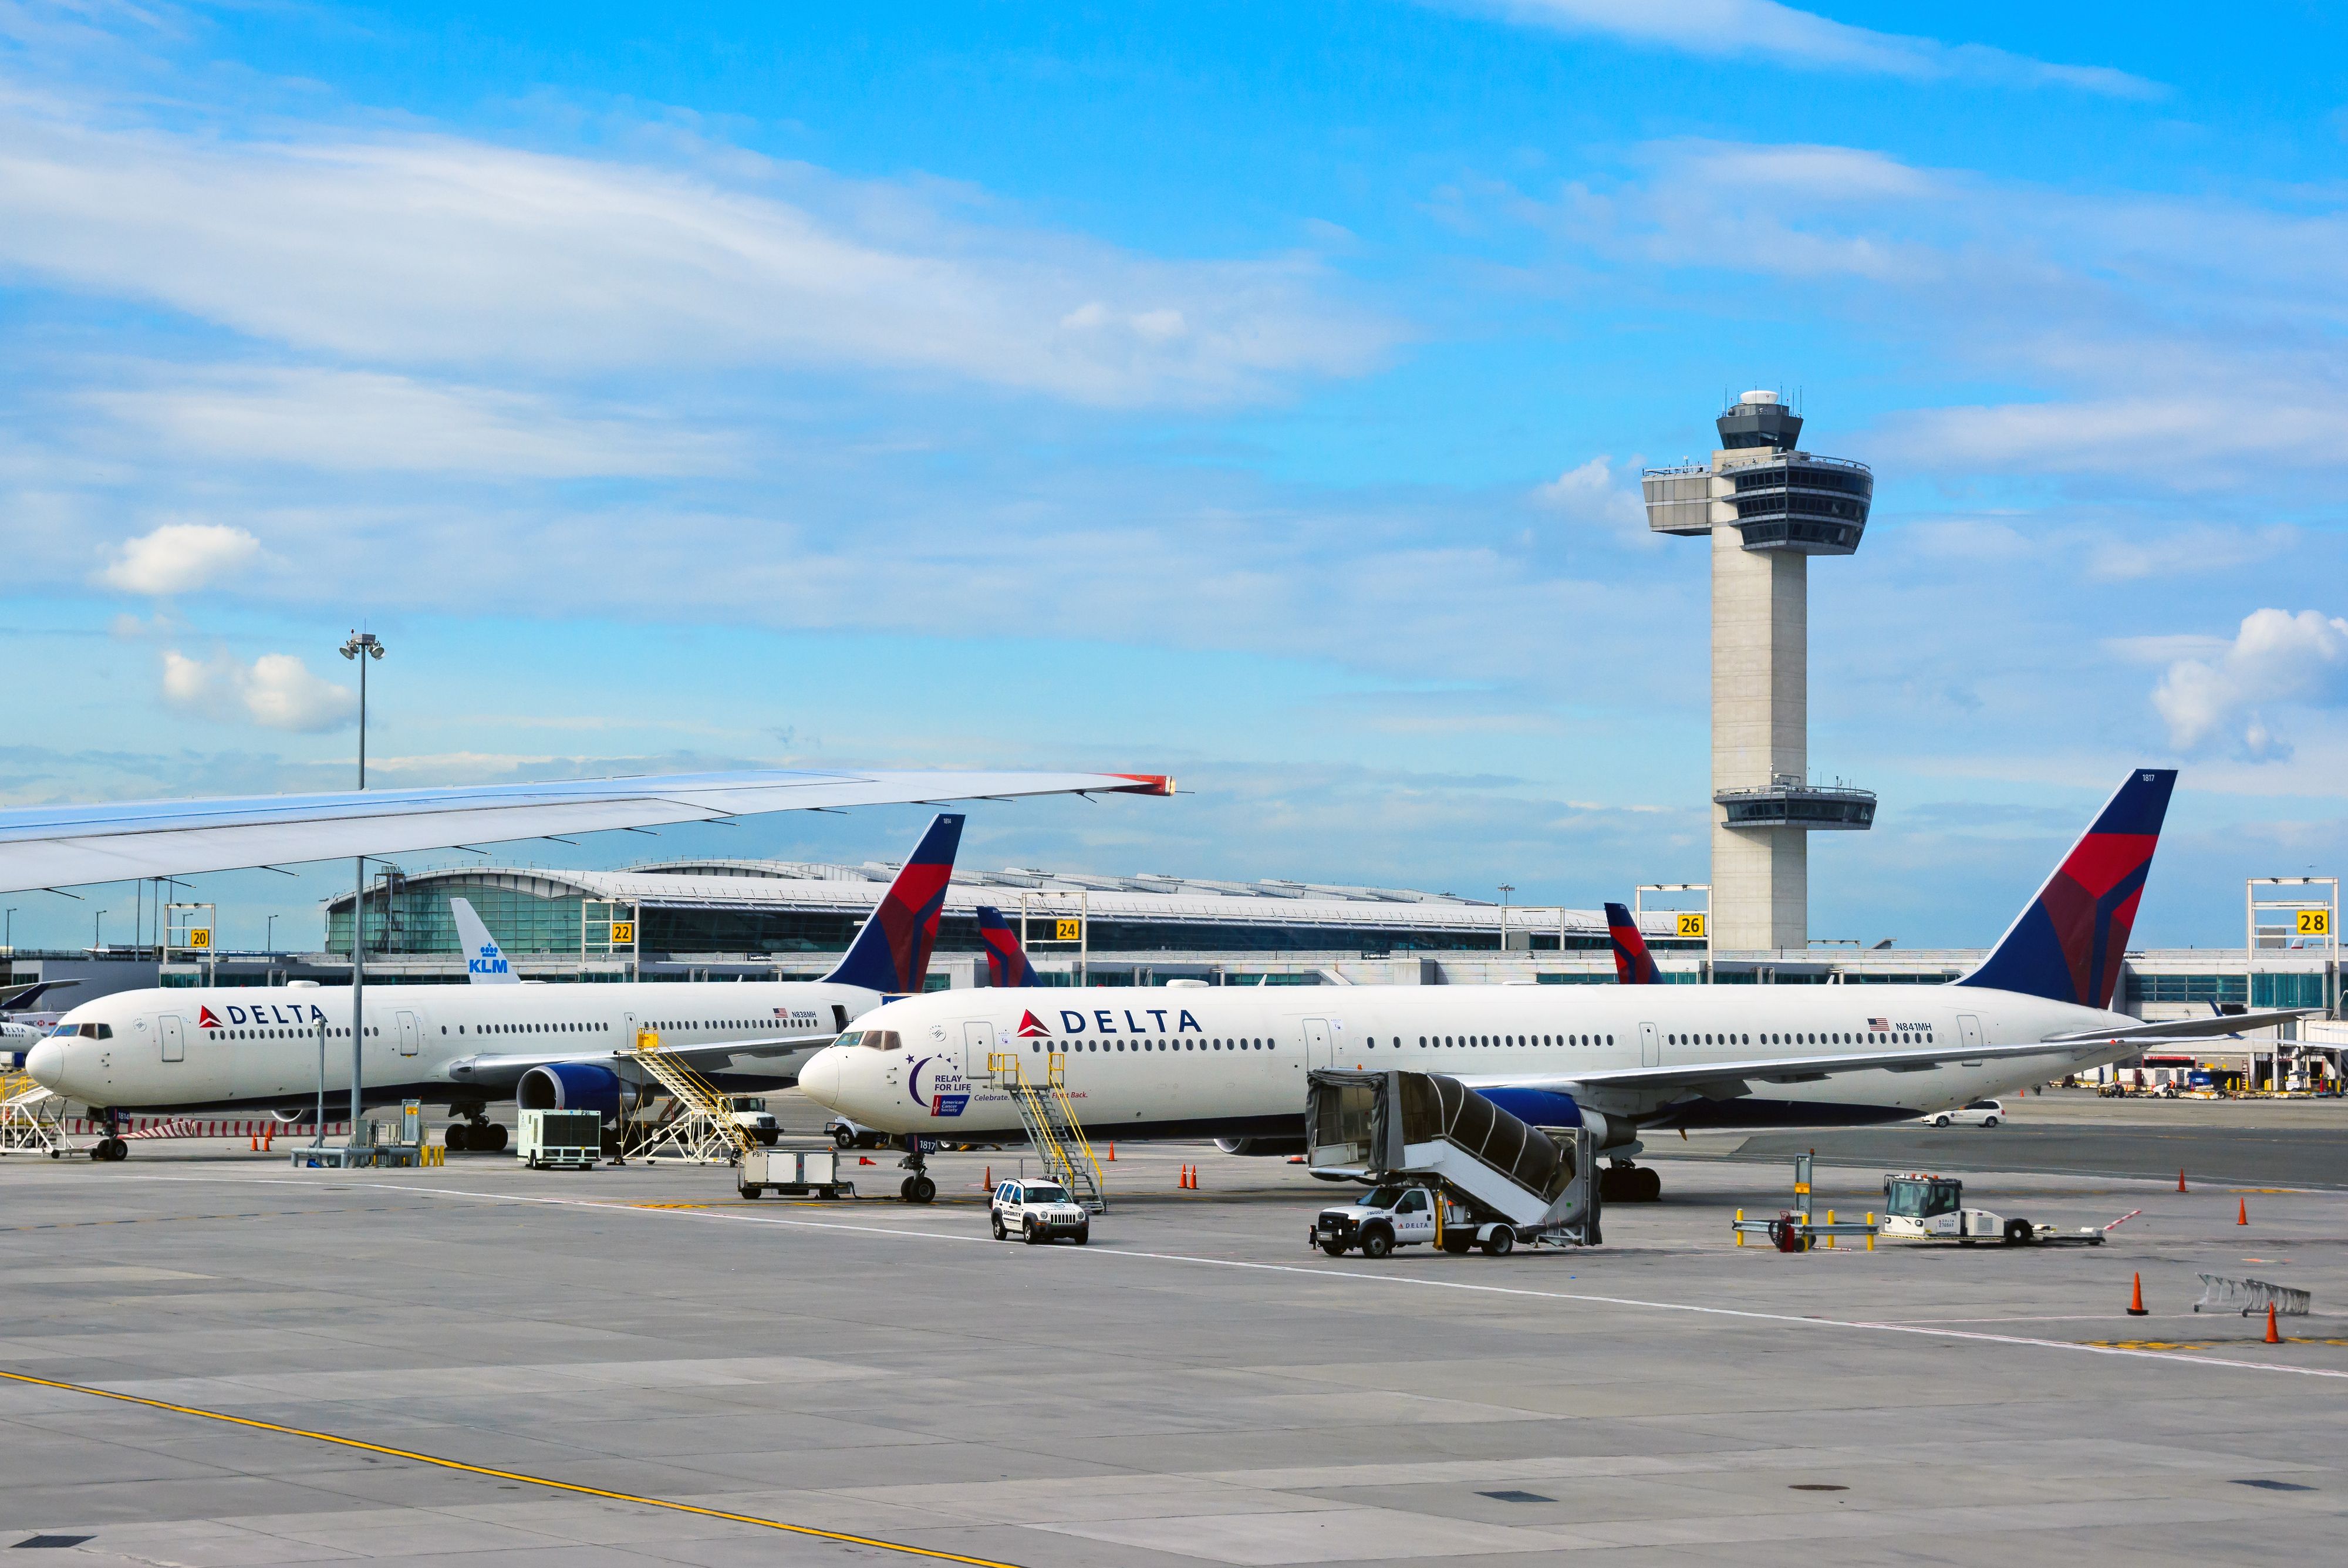 A view of the apron at John F. Kennedy International airport with multiple parked Delta Air Lines' planes and the control tower in background.